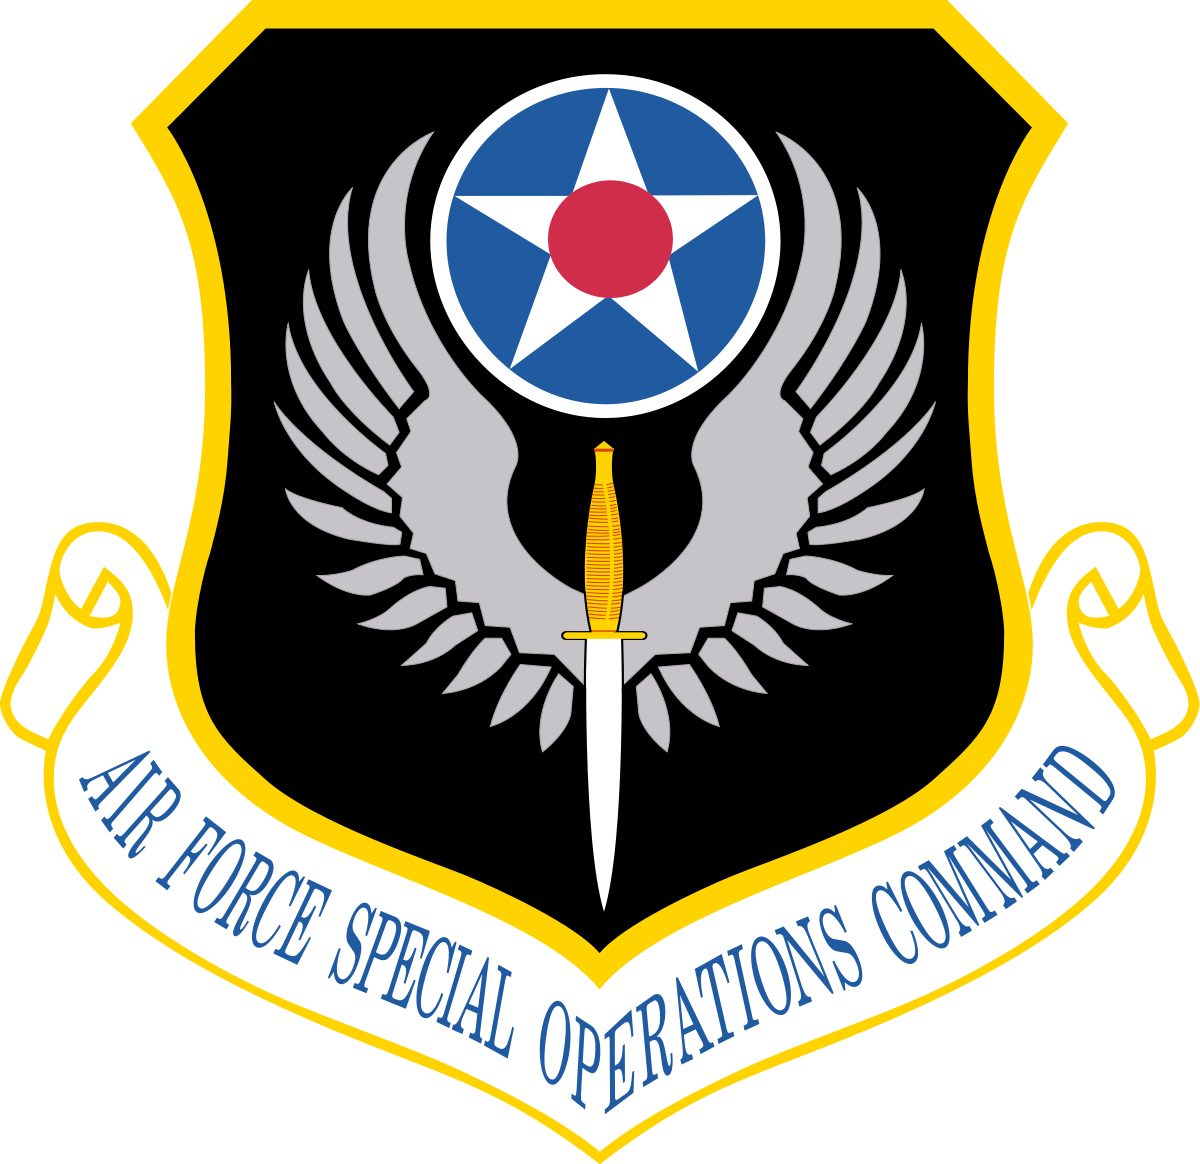 USAF Red Eagle Logo - Air Force Special Operations Command